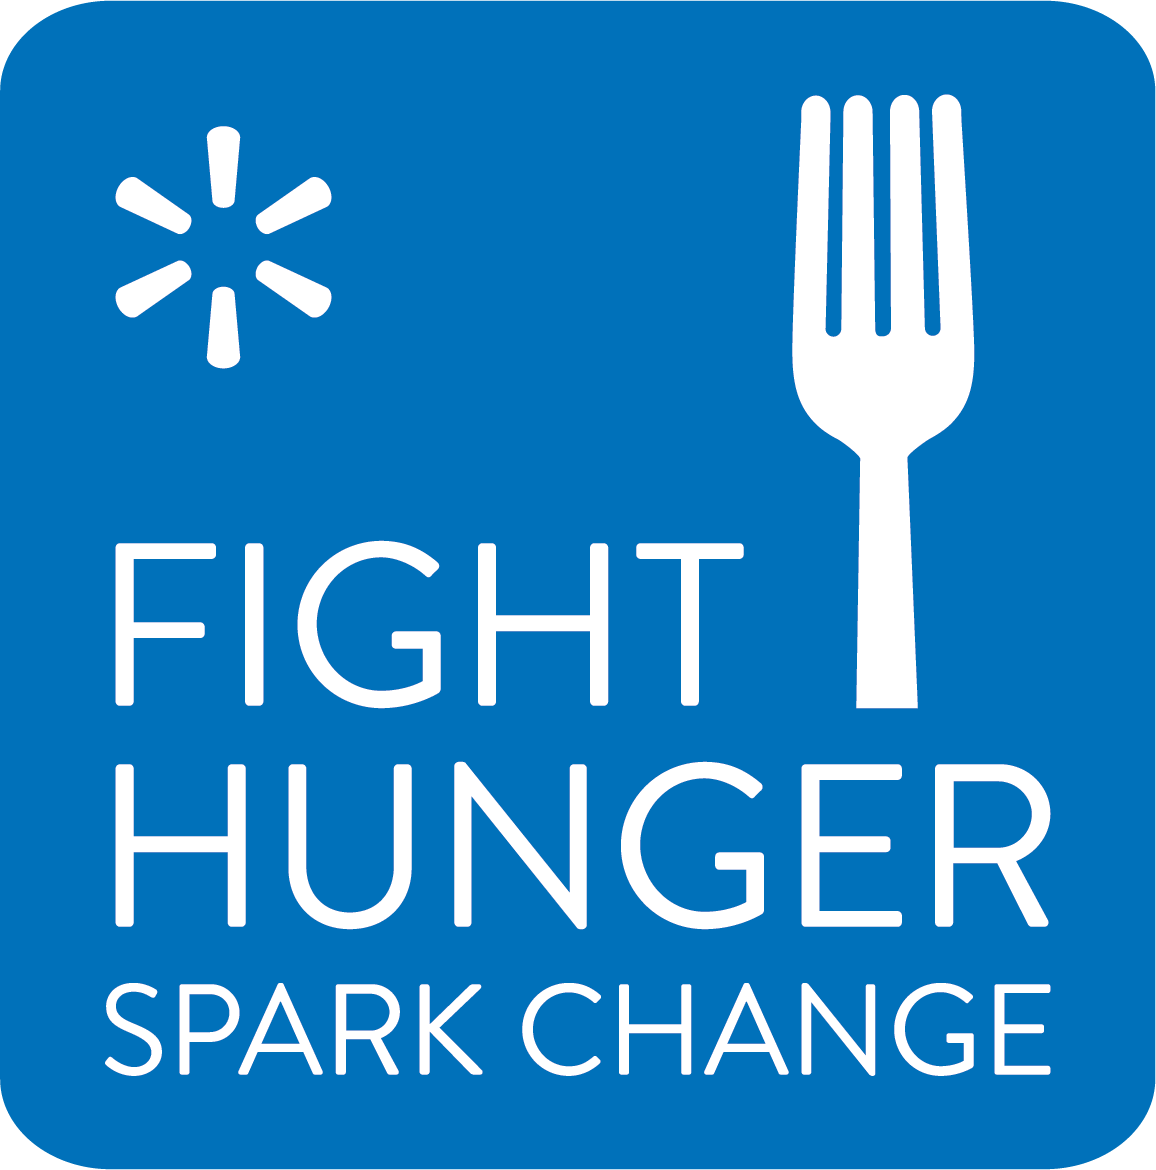 Walmart and Sam’s Club Fight Hunger. Spark Change campaign returns to the Ozarks to help people facing hunger